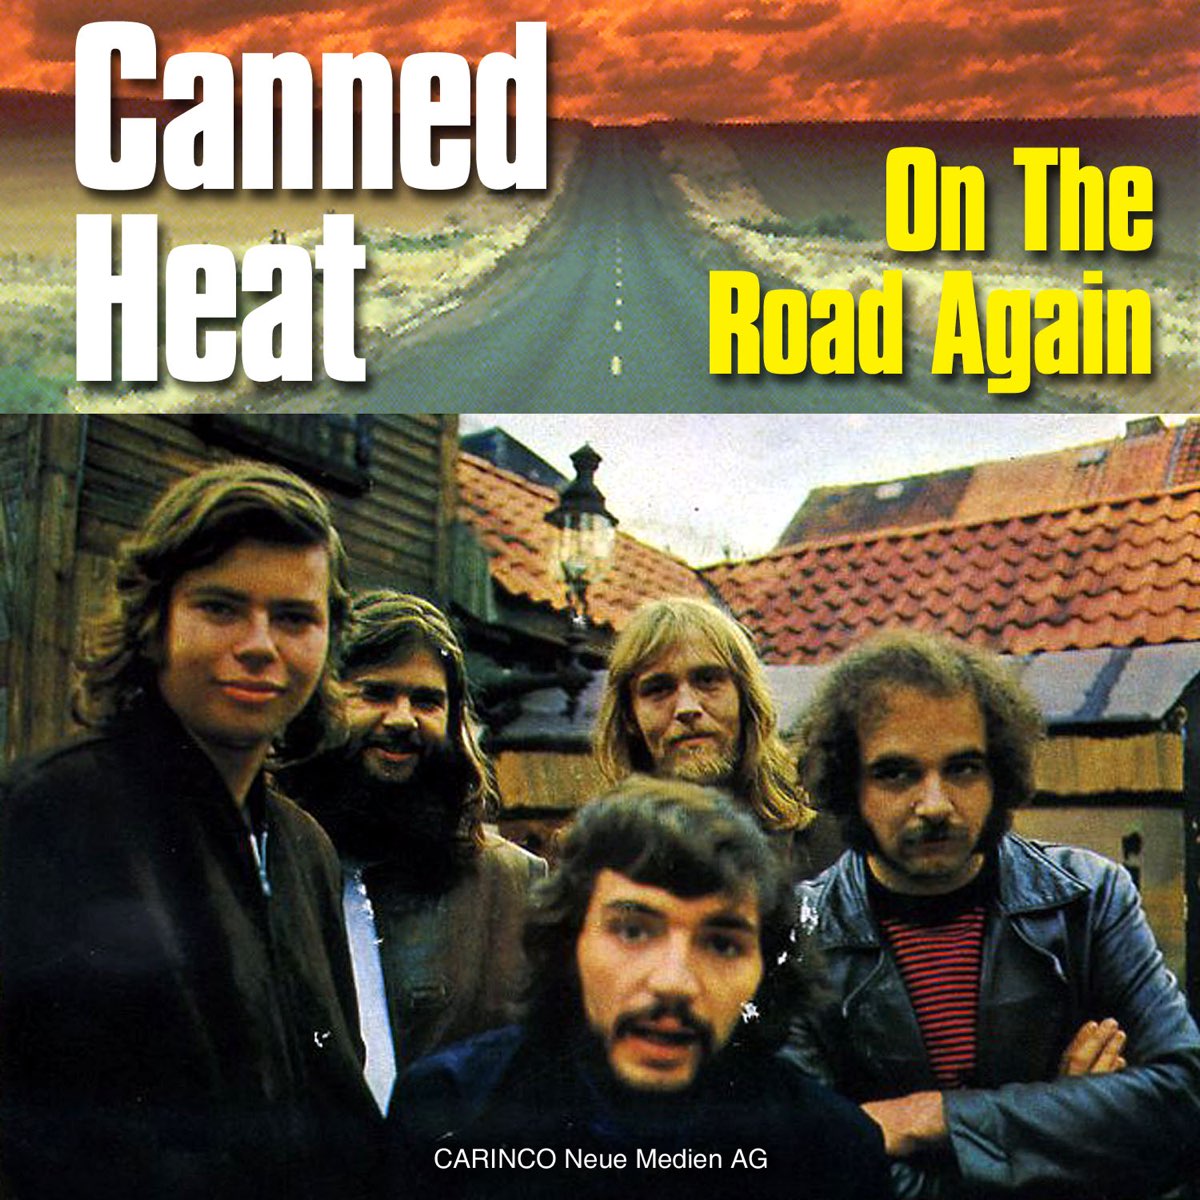 Canned heat steam фото 85